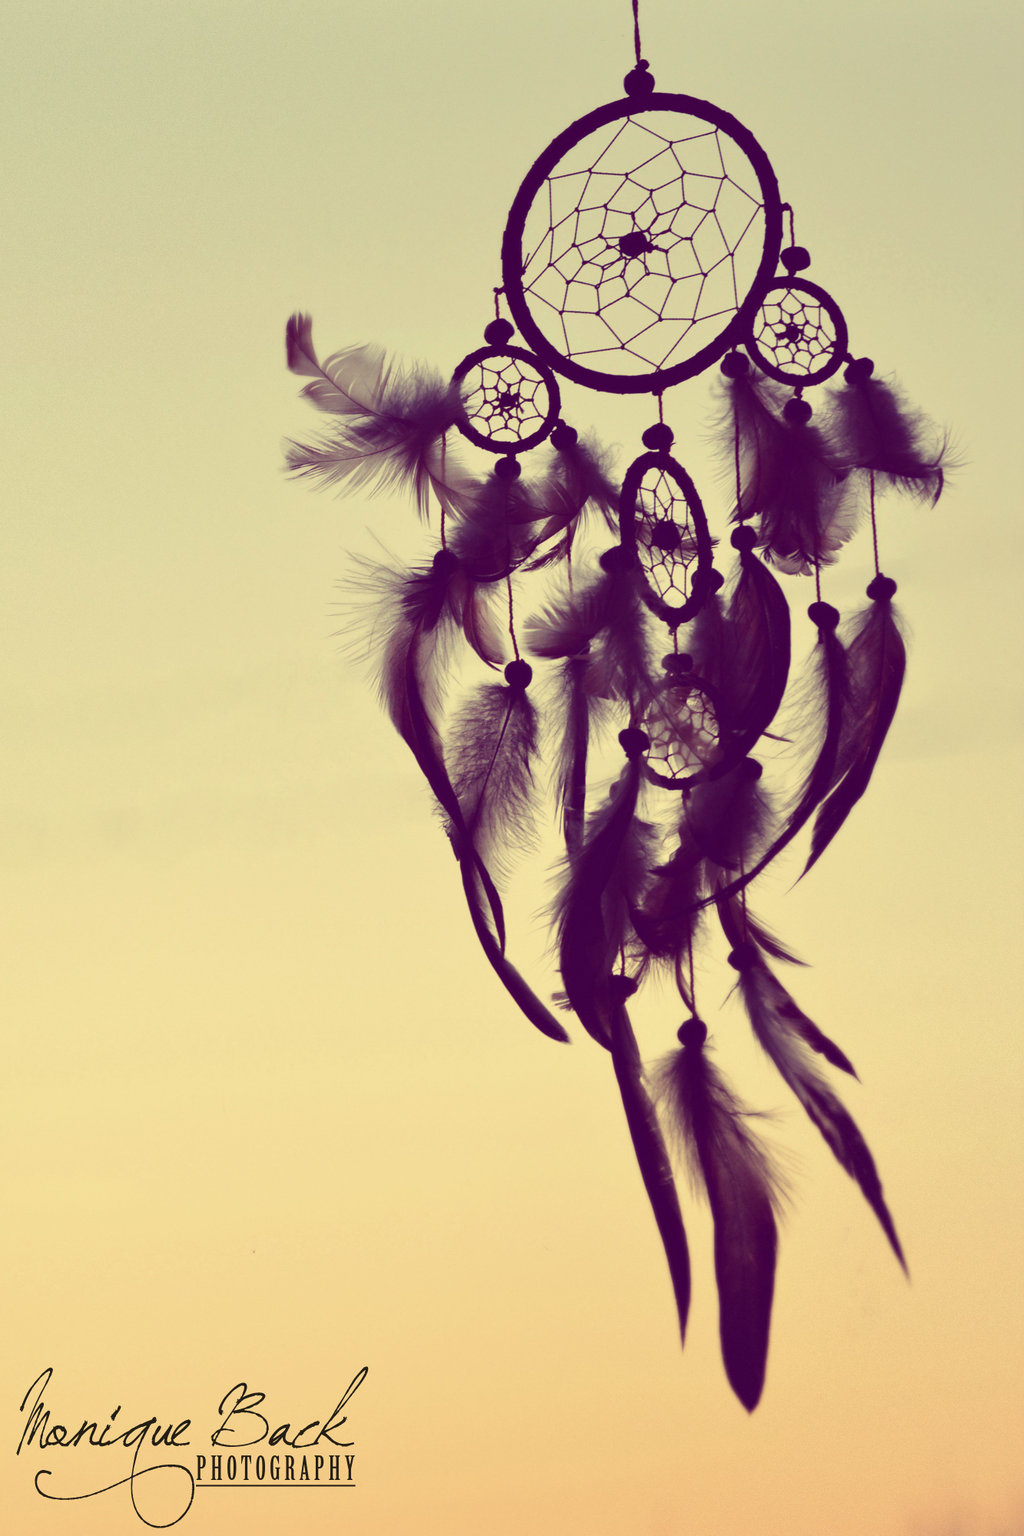 Dreamcatcher Silhouette by fucute on